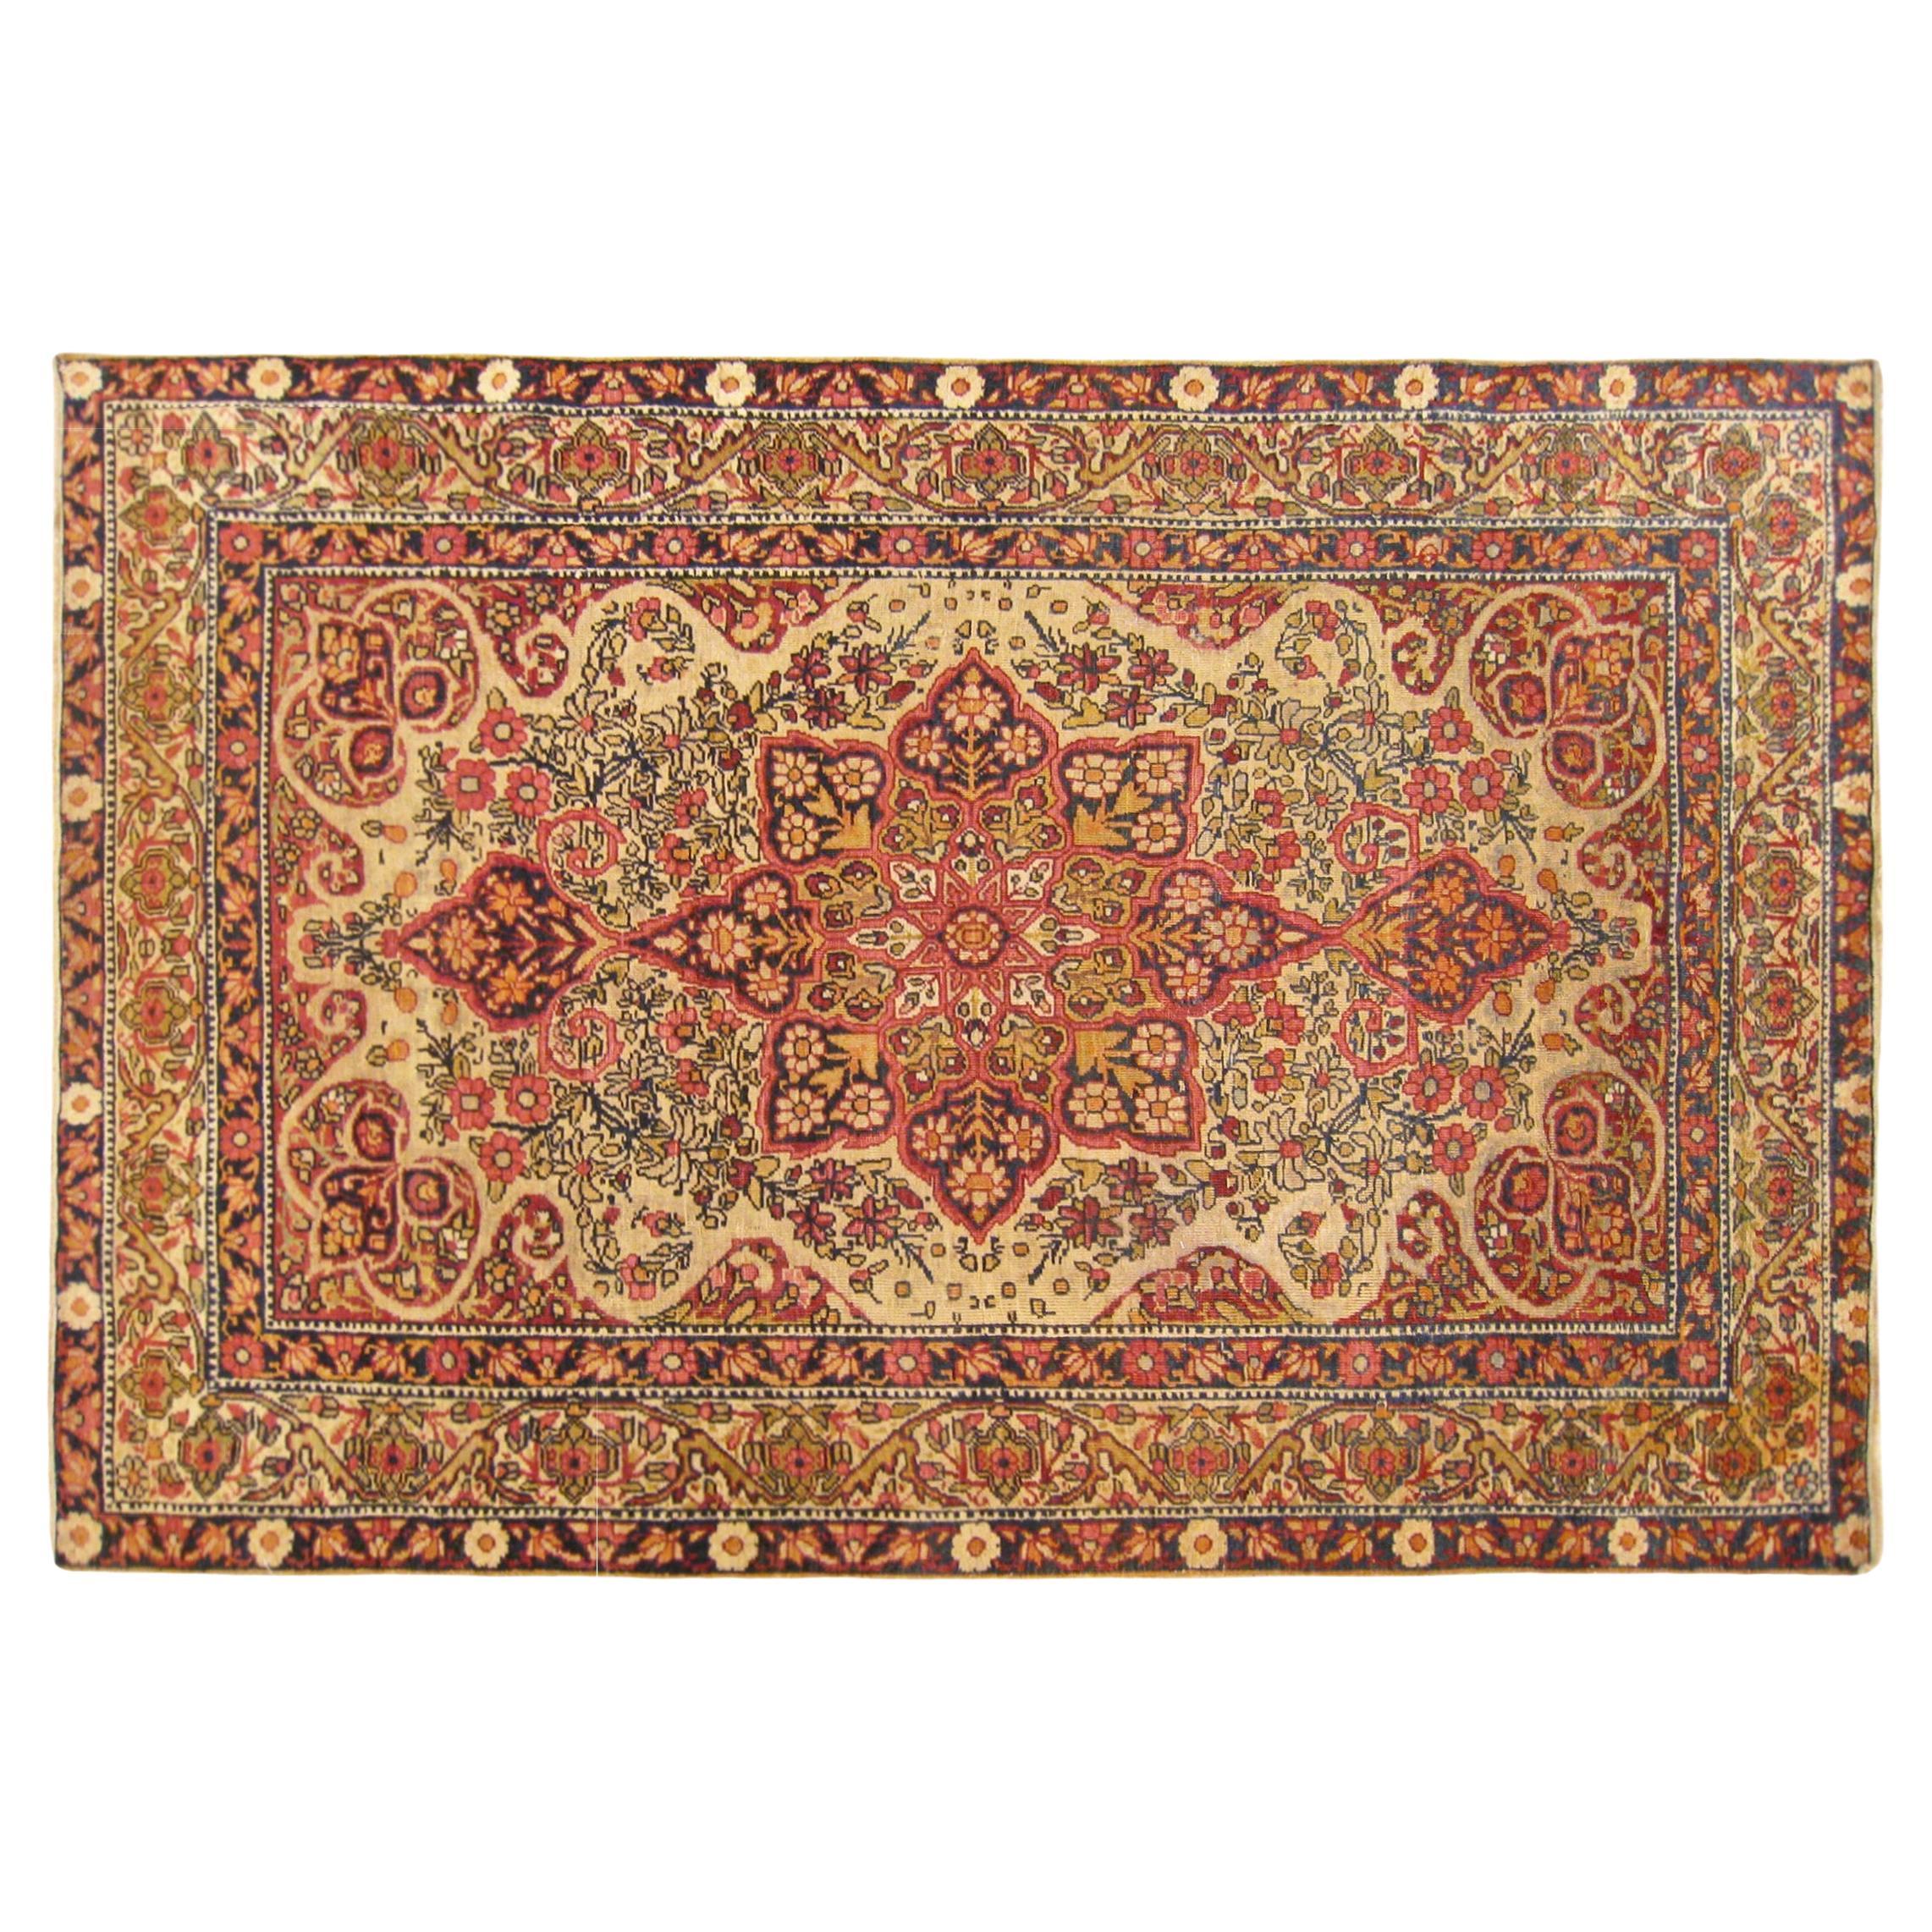 Antique Persian Lavar Oriental Carpet, in Small Size, with a Central Medallion